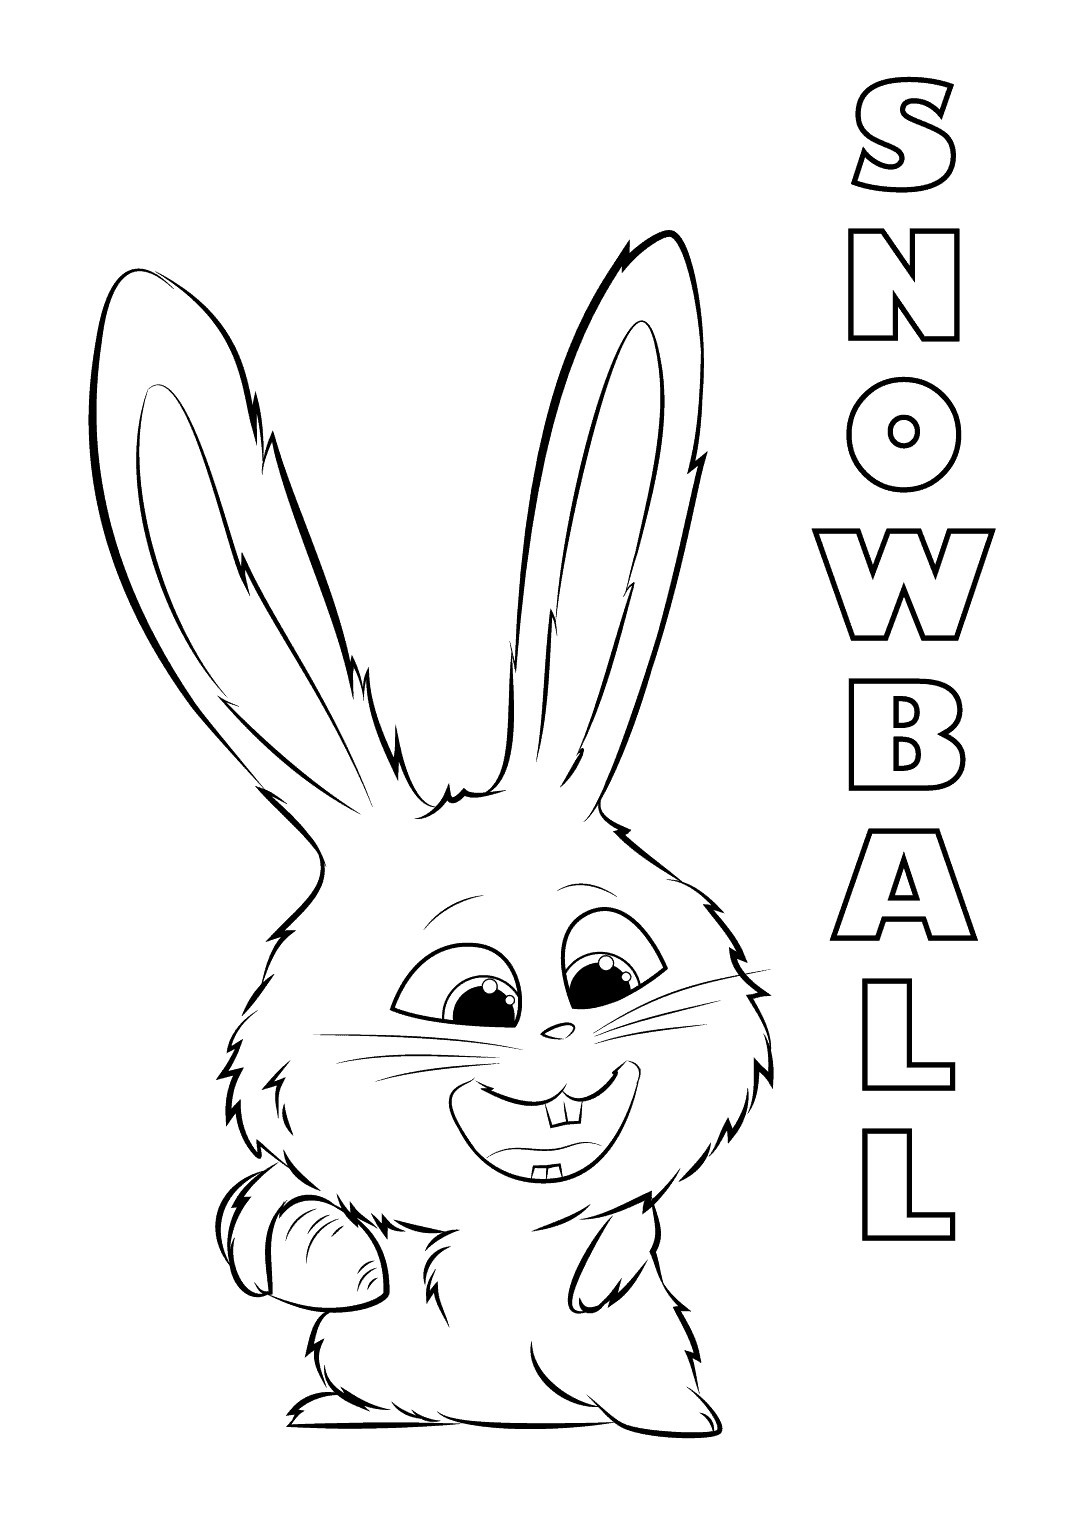 snowball-coloring-page-free-printable-coloring-pages-for-kids